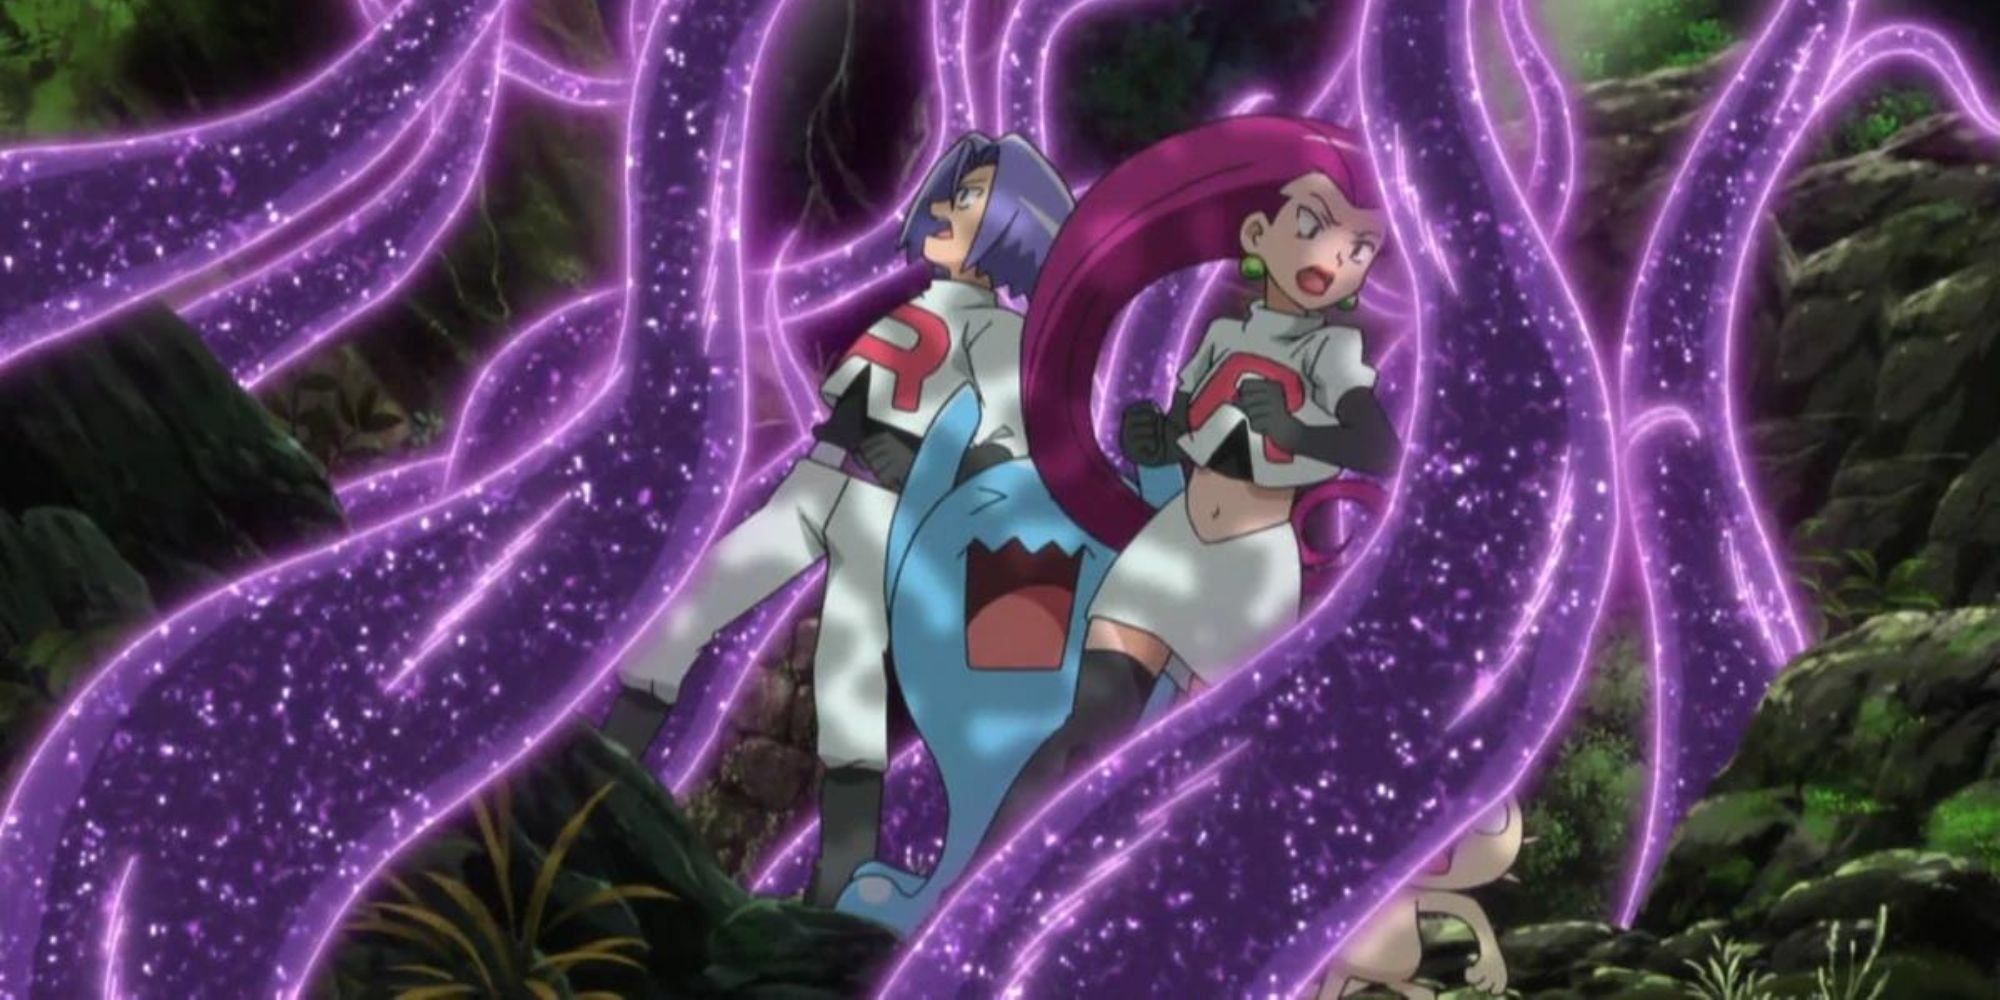 Trevenant uses Forests Curse on Team Rocket as they're surrounded by purple swirls